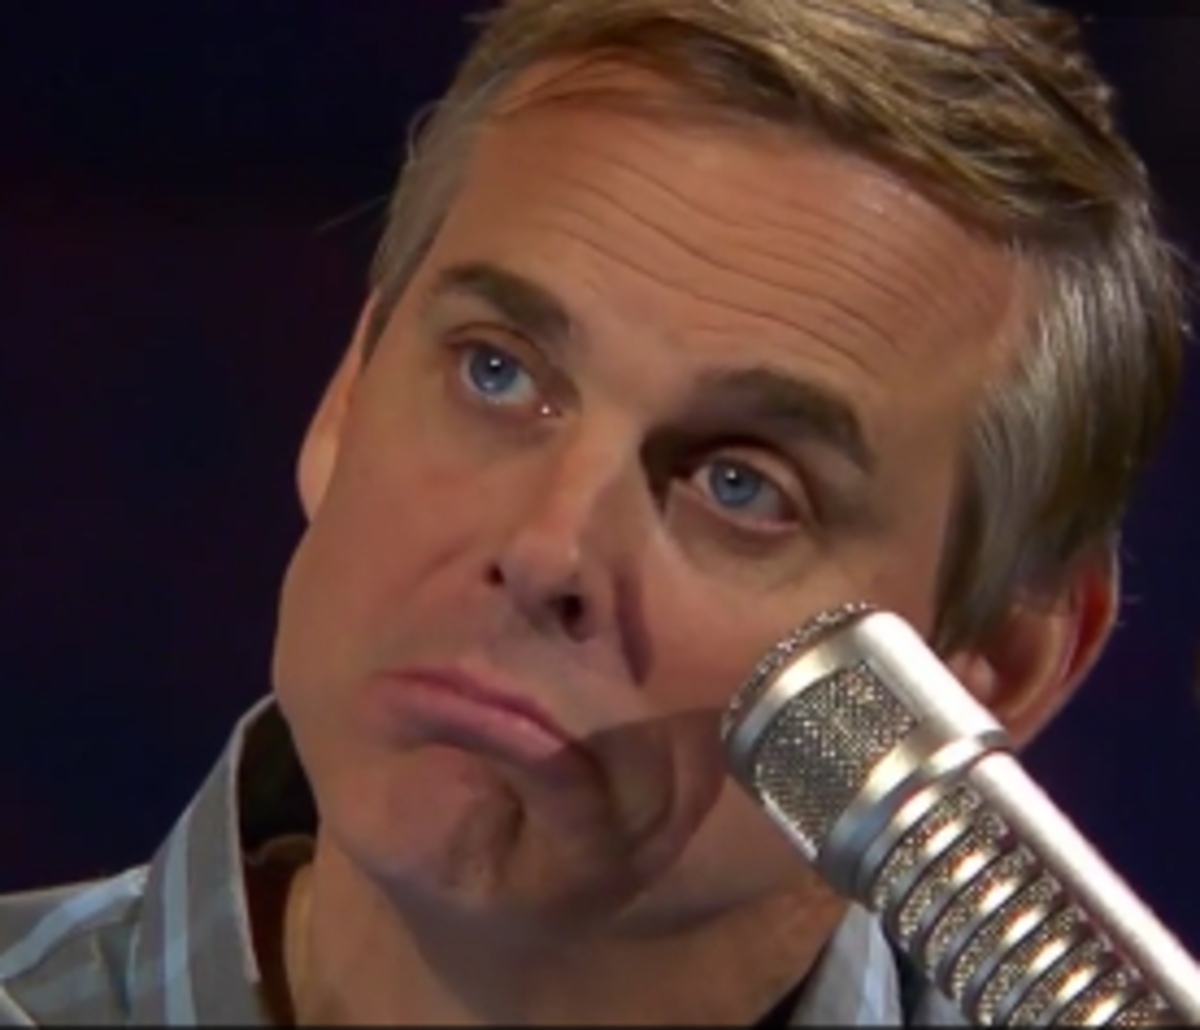 Colin Cowherd discussing Iowa on The Herd.